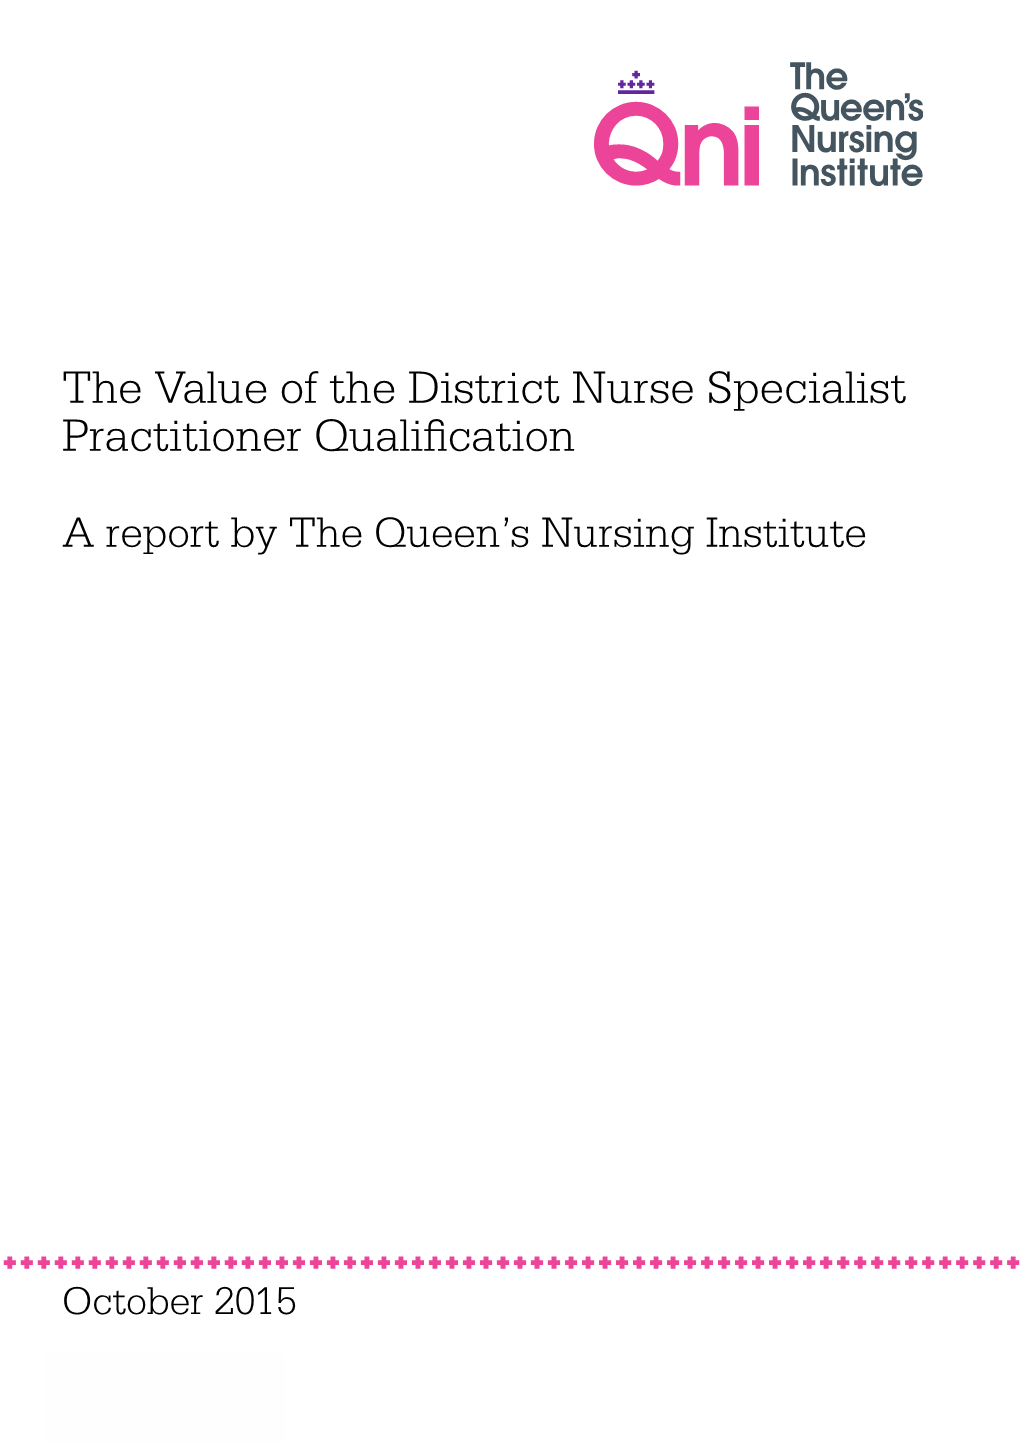 The Value of the District Nurse Specialist Practitioner Qualification